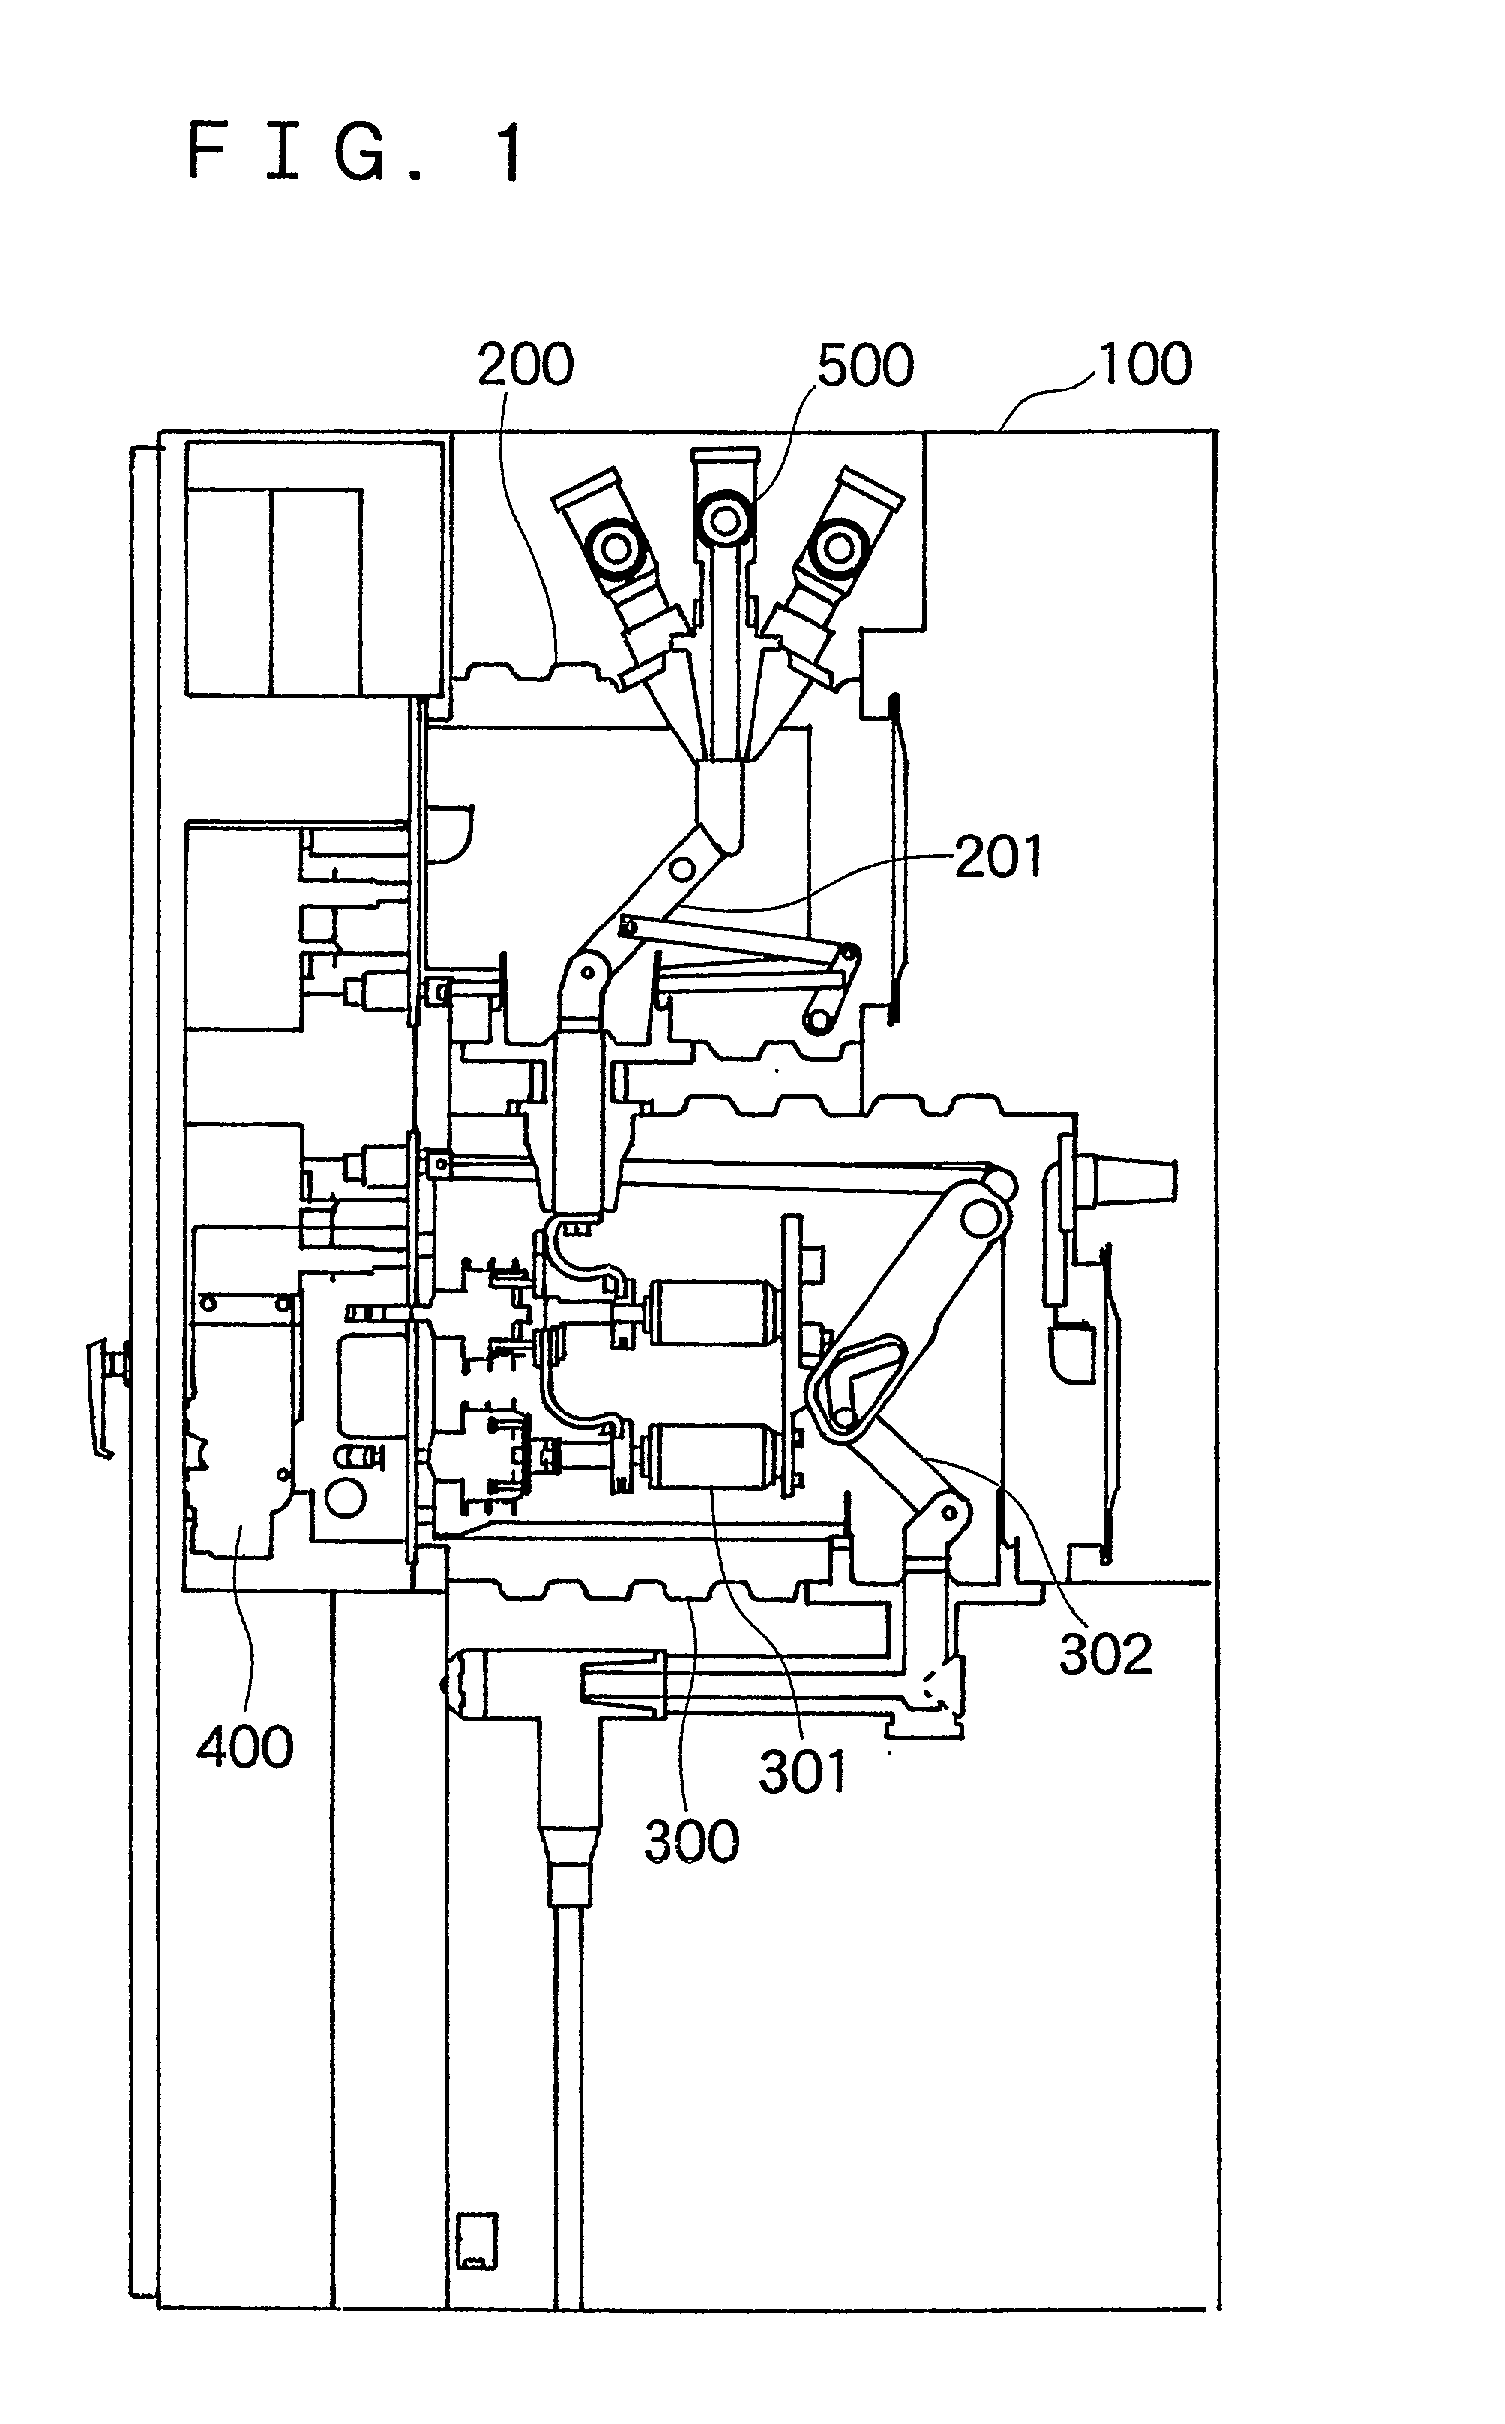 Gas-filled switching apparatus